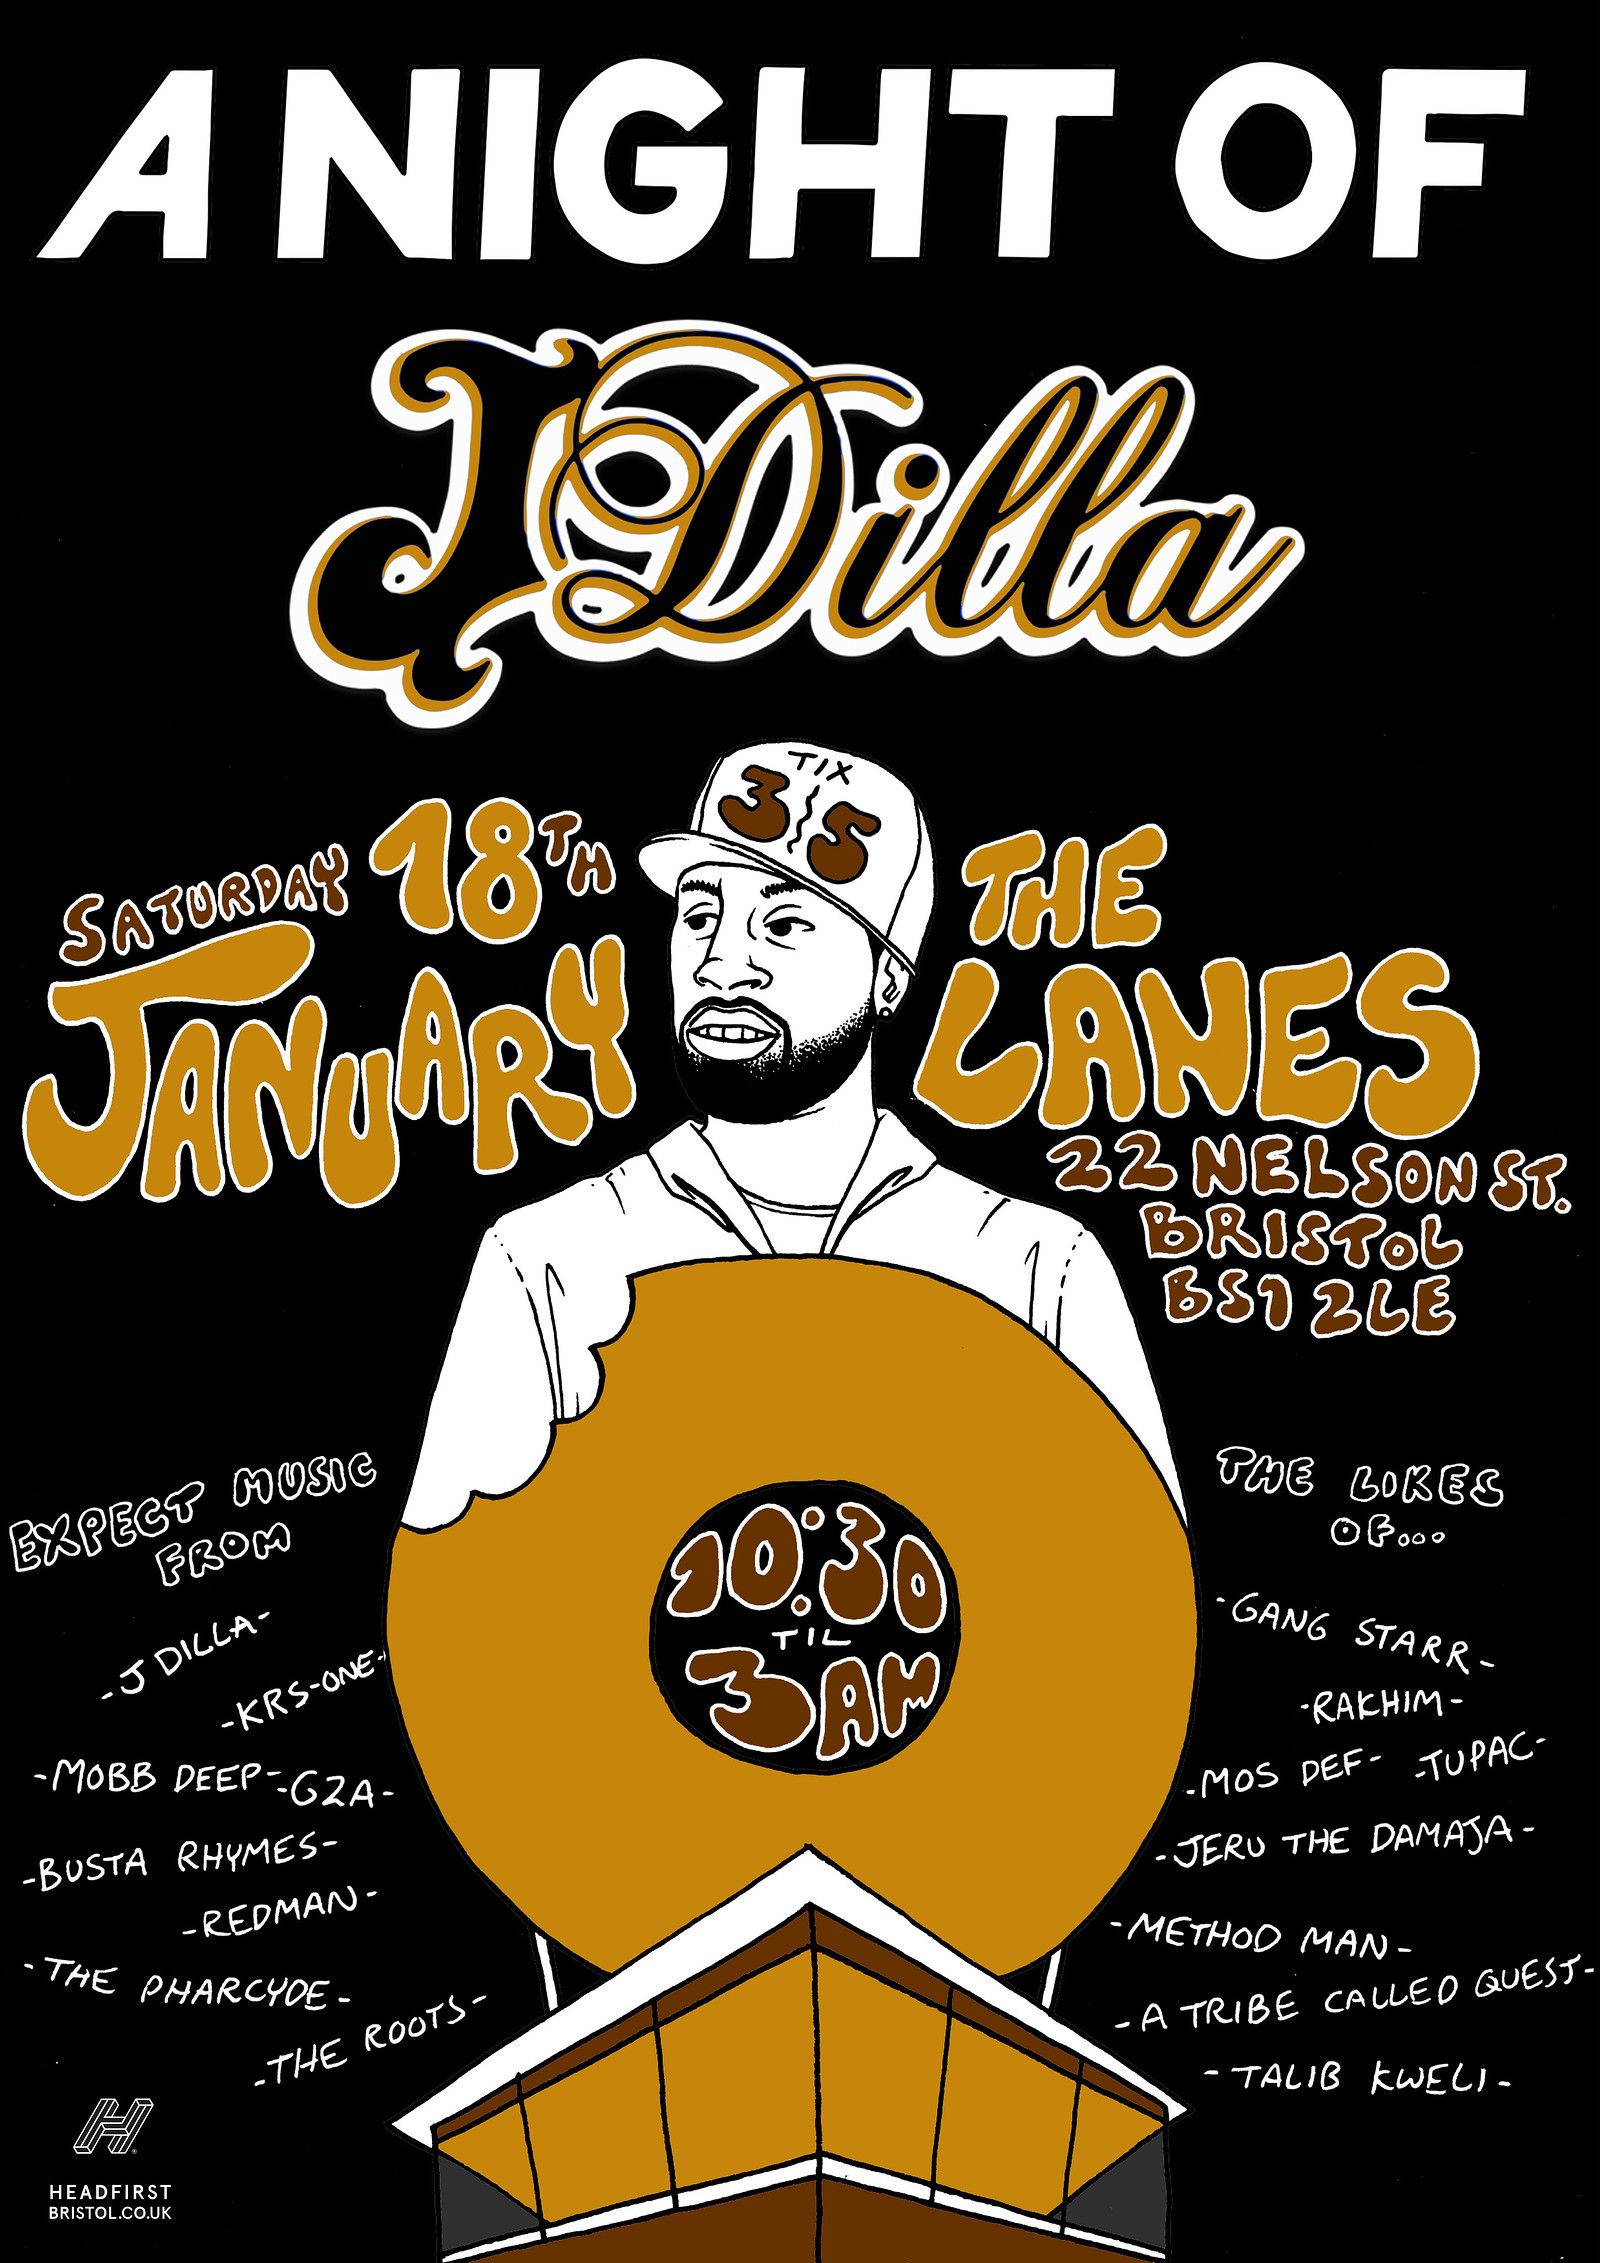 A Night Of: J Dilla at The Lanes